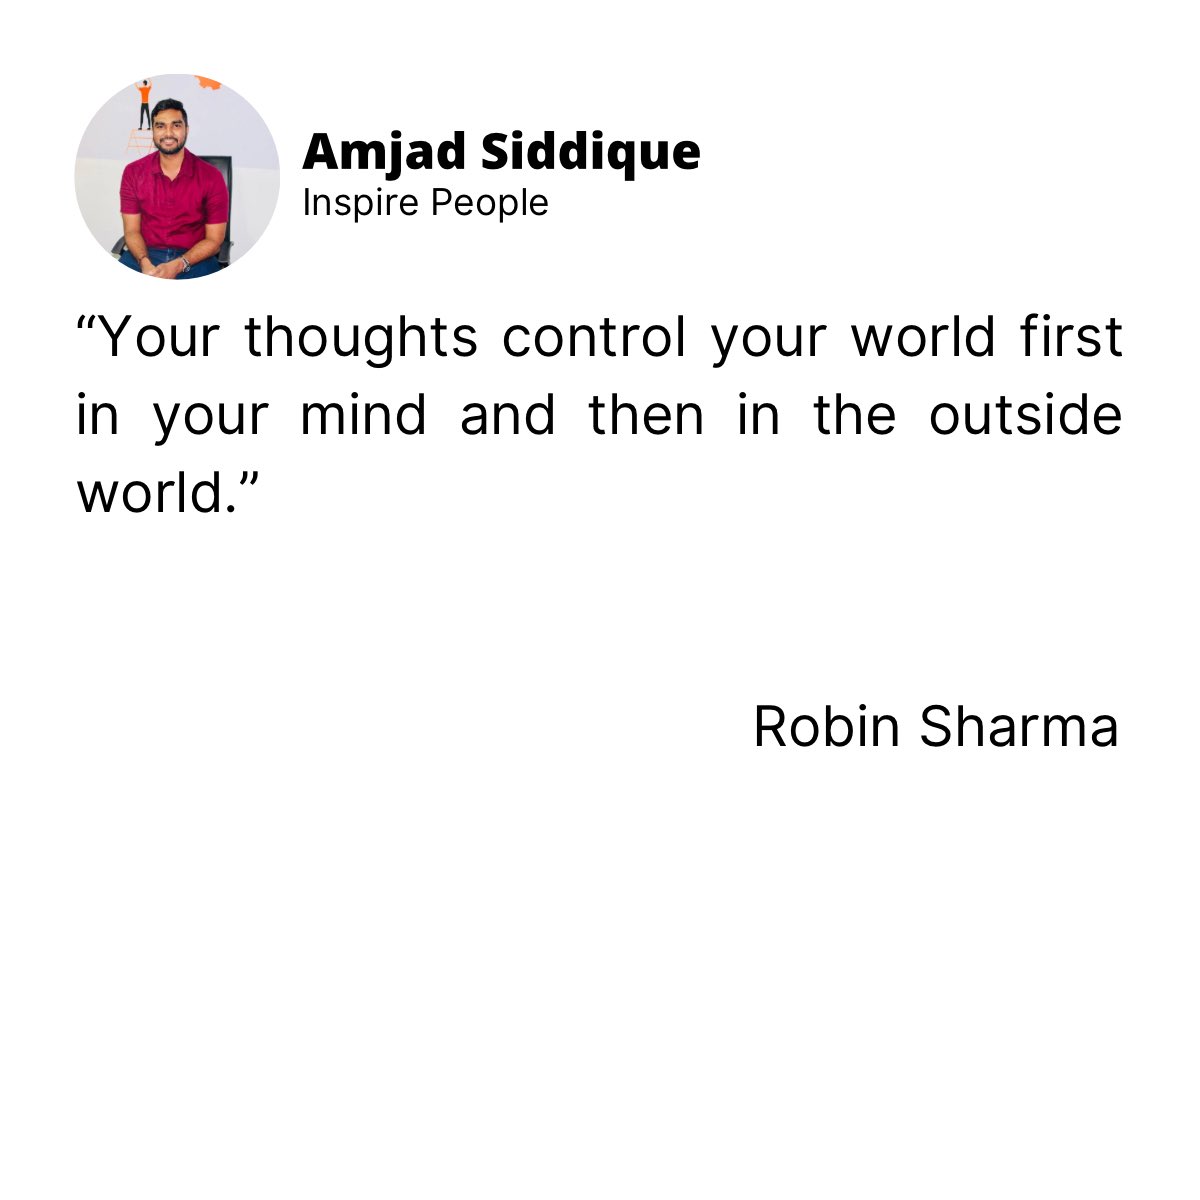 Learnings From My Reading Journey 📖               

What do you think? 🤔 please share your thoughts 💭, Thank you!

MegaLiving: 30 Days To A Perfect Life 
Robin Sharma

For more updates follow - @amjad__siddique                      

#readingbooks #education #amjadsiddique